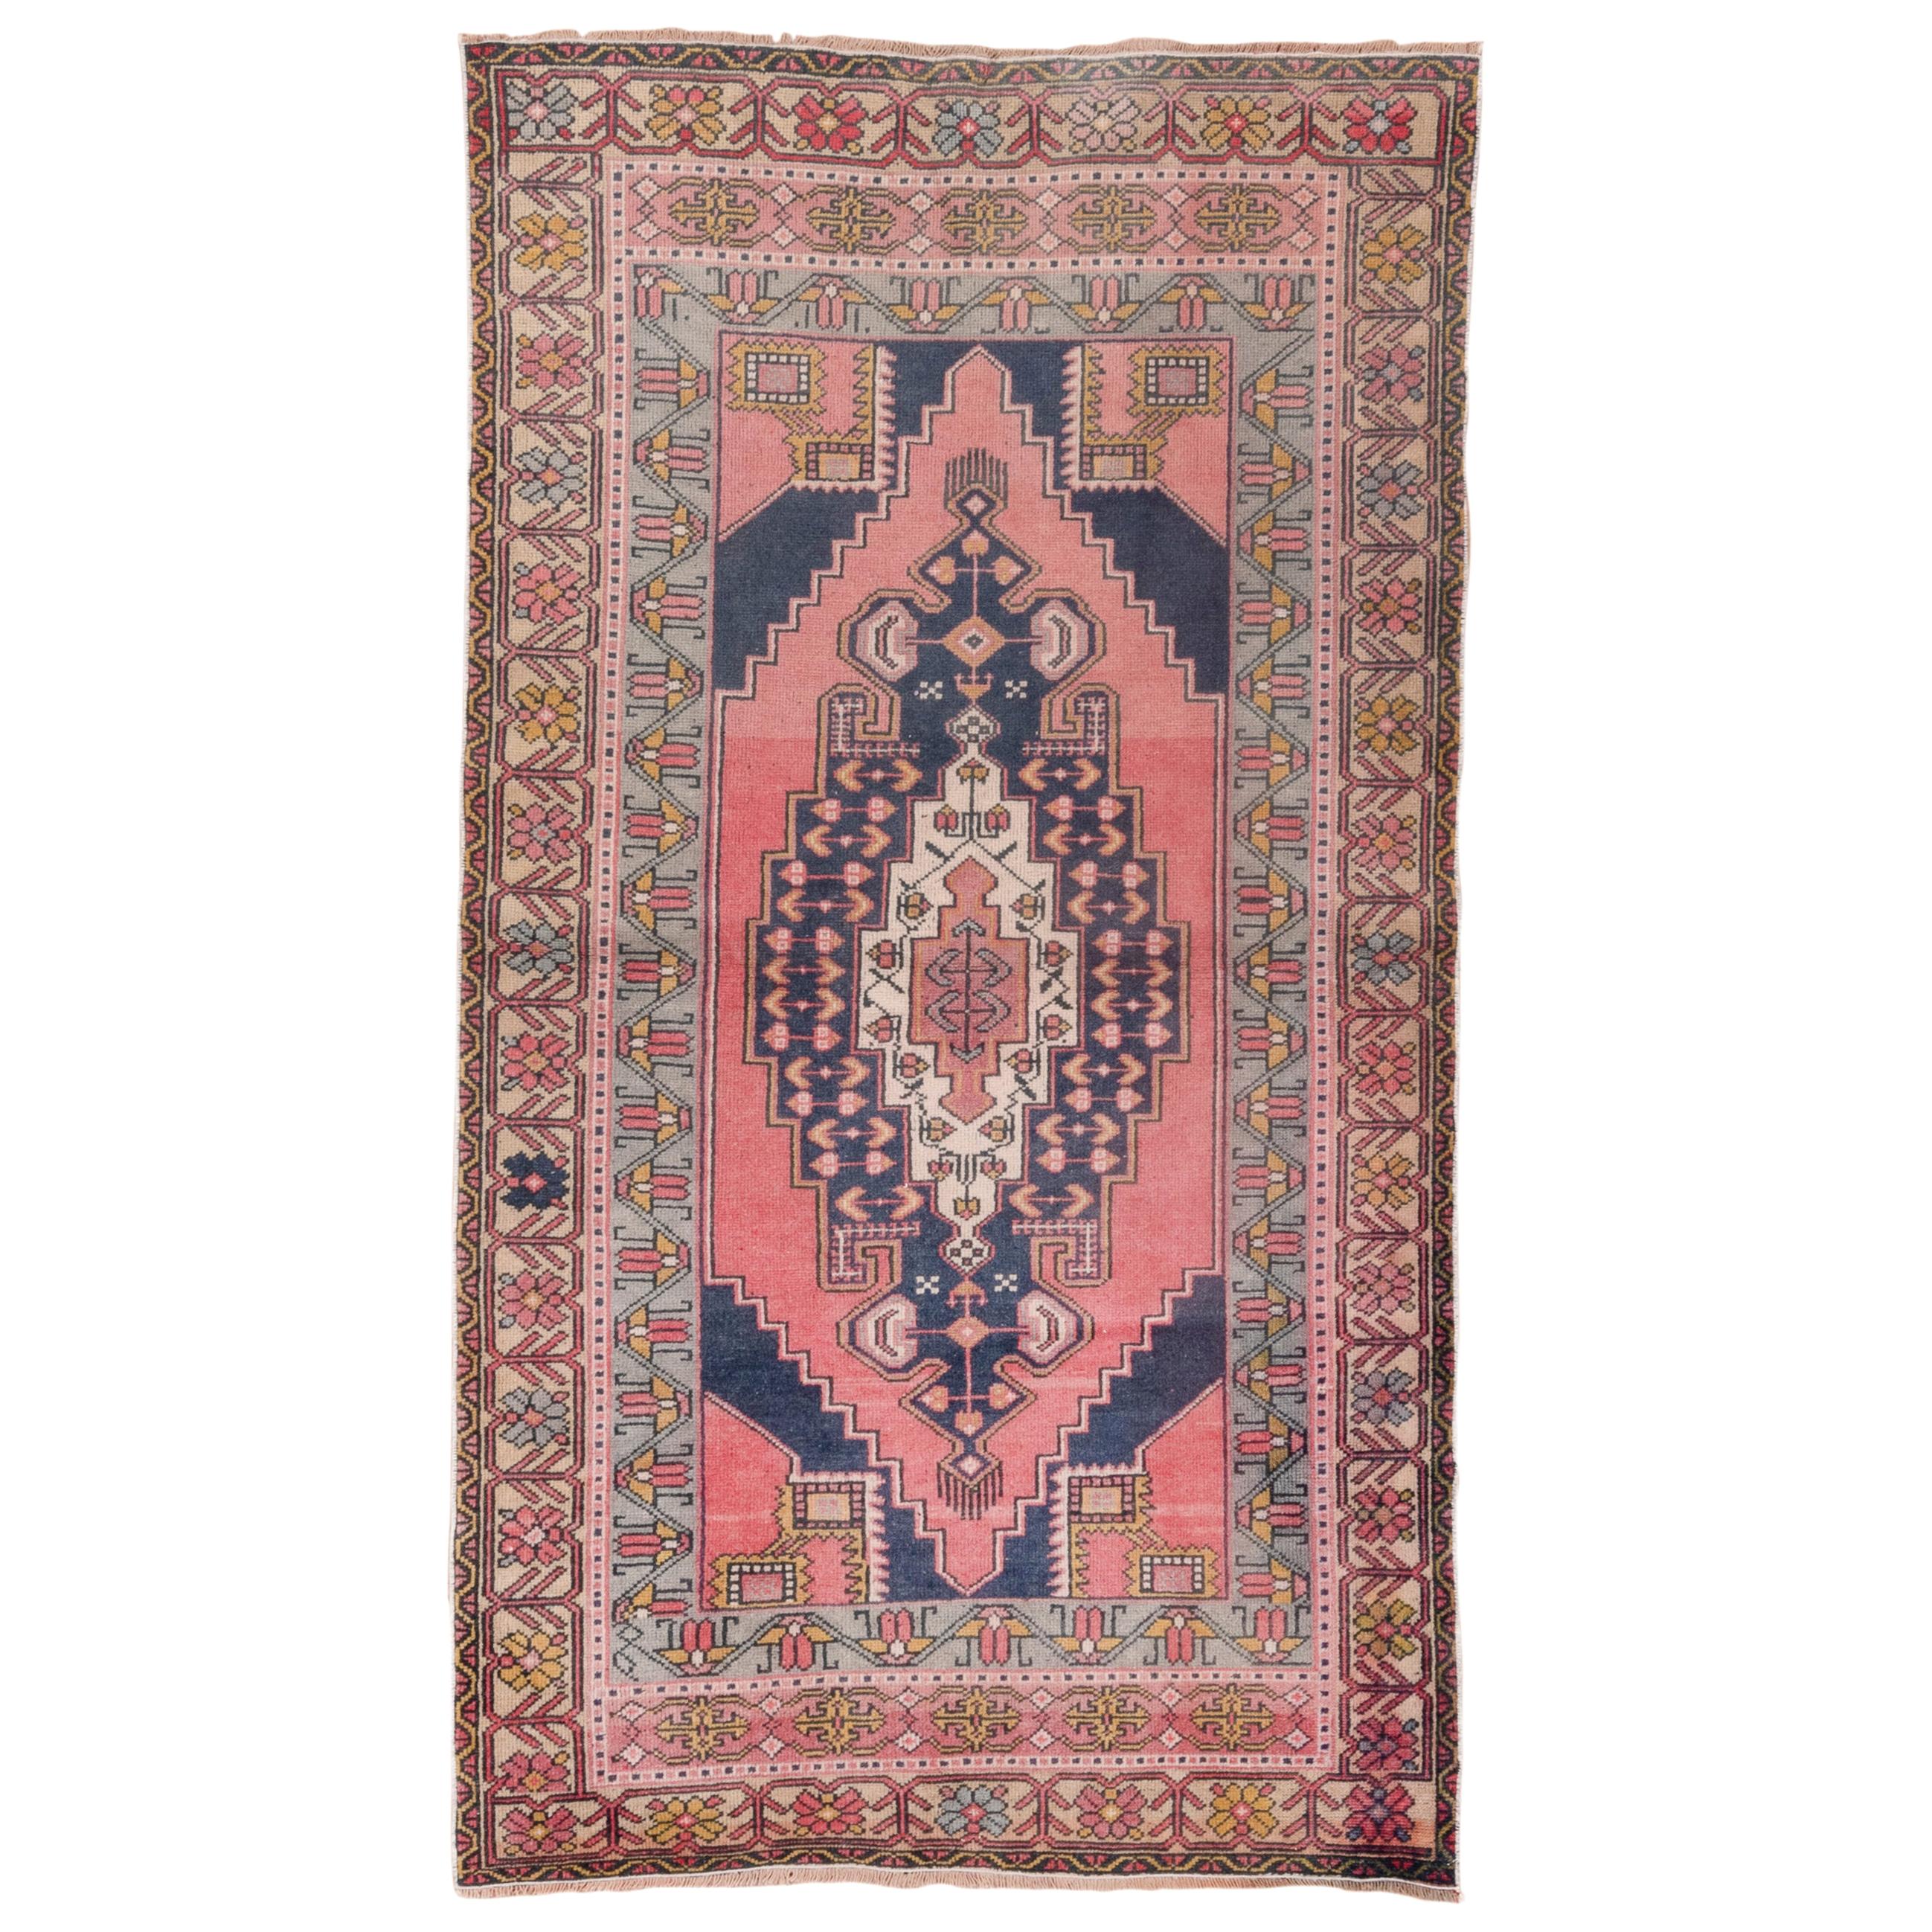 Colorful Oushak Rug, Pink and Navy Tones